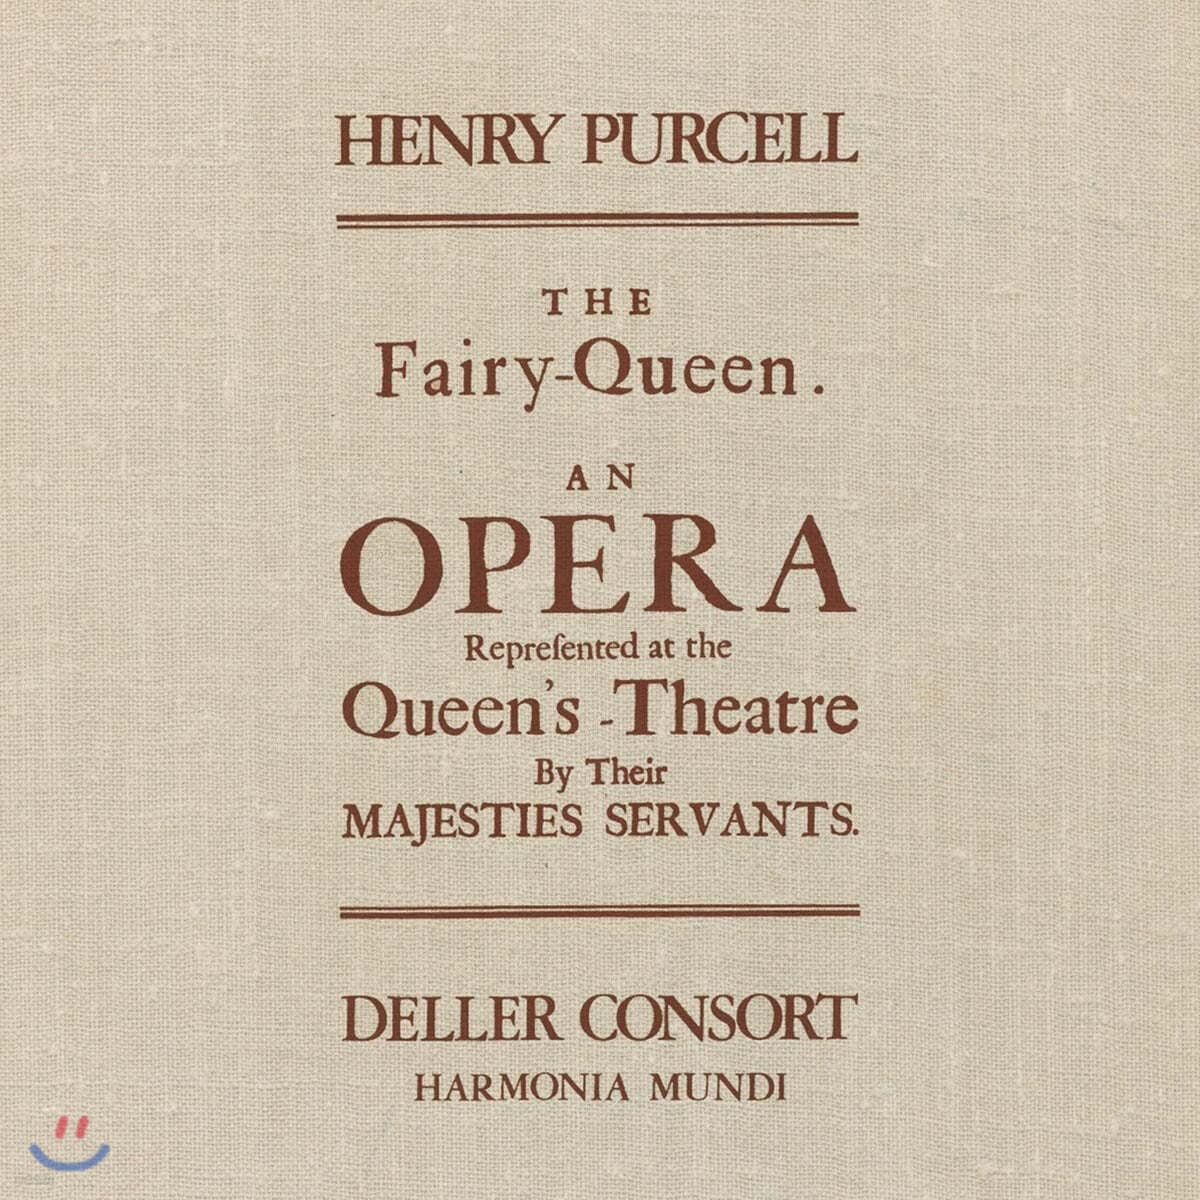 Alfred Deller 퍼셀: 오페라 '요정 여왕' (Purcell: The Fairy Queen) [3LP]